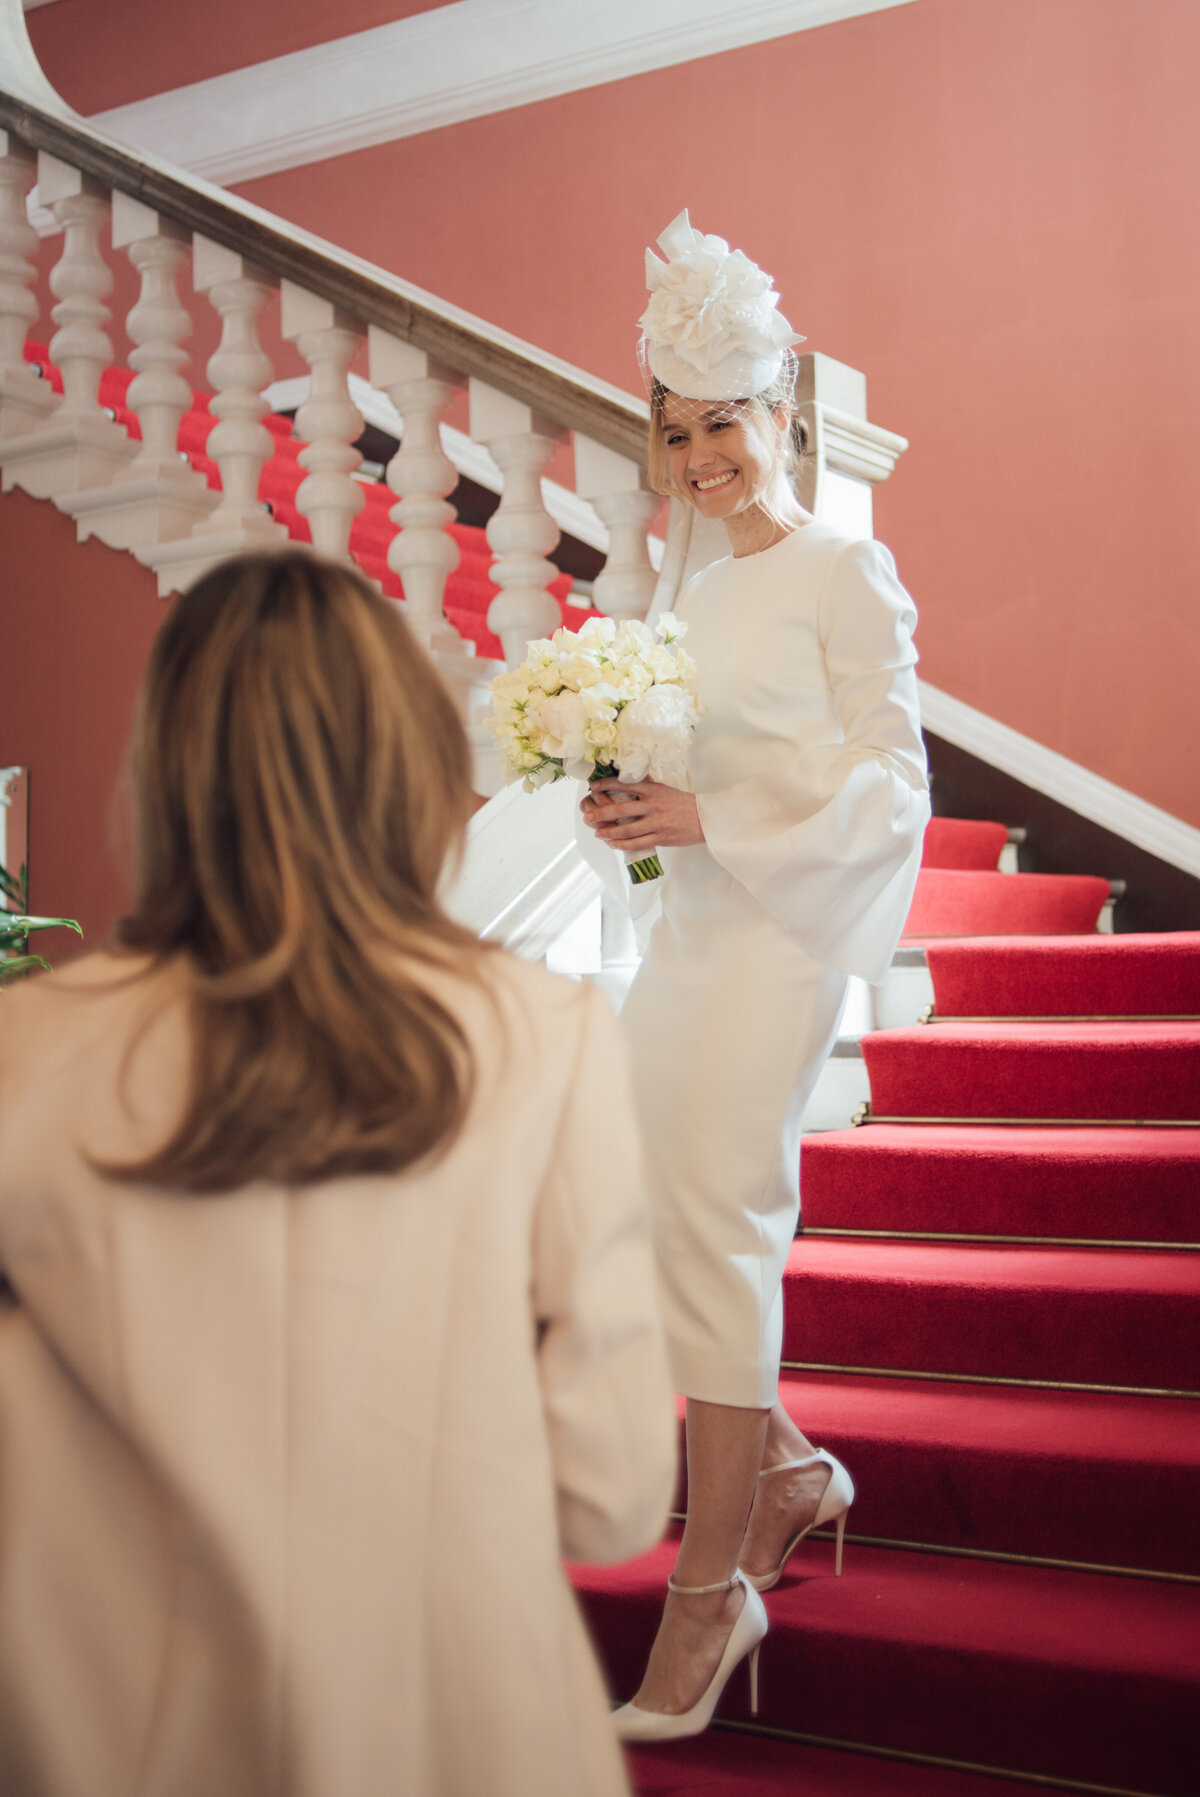 A bride walking down a staircase on her wedding day  taken by London Wedding Photographer Liberty Pearl